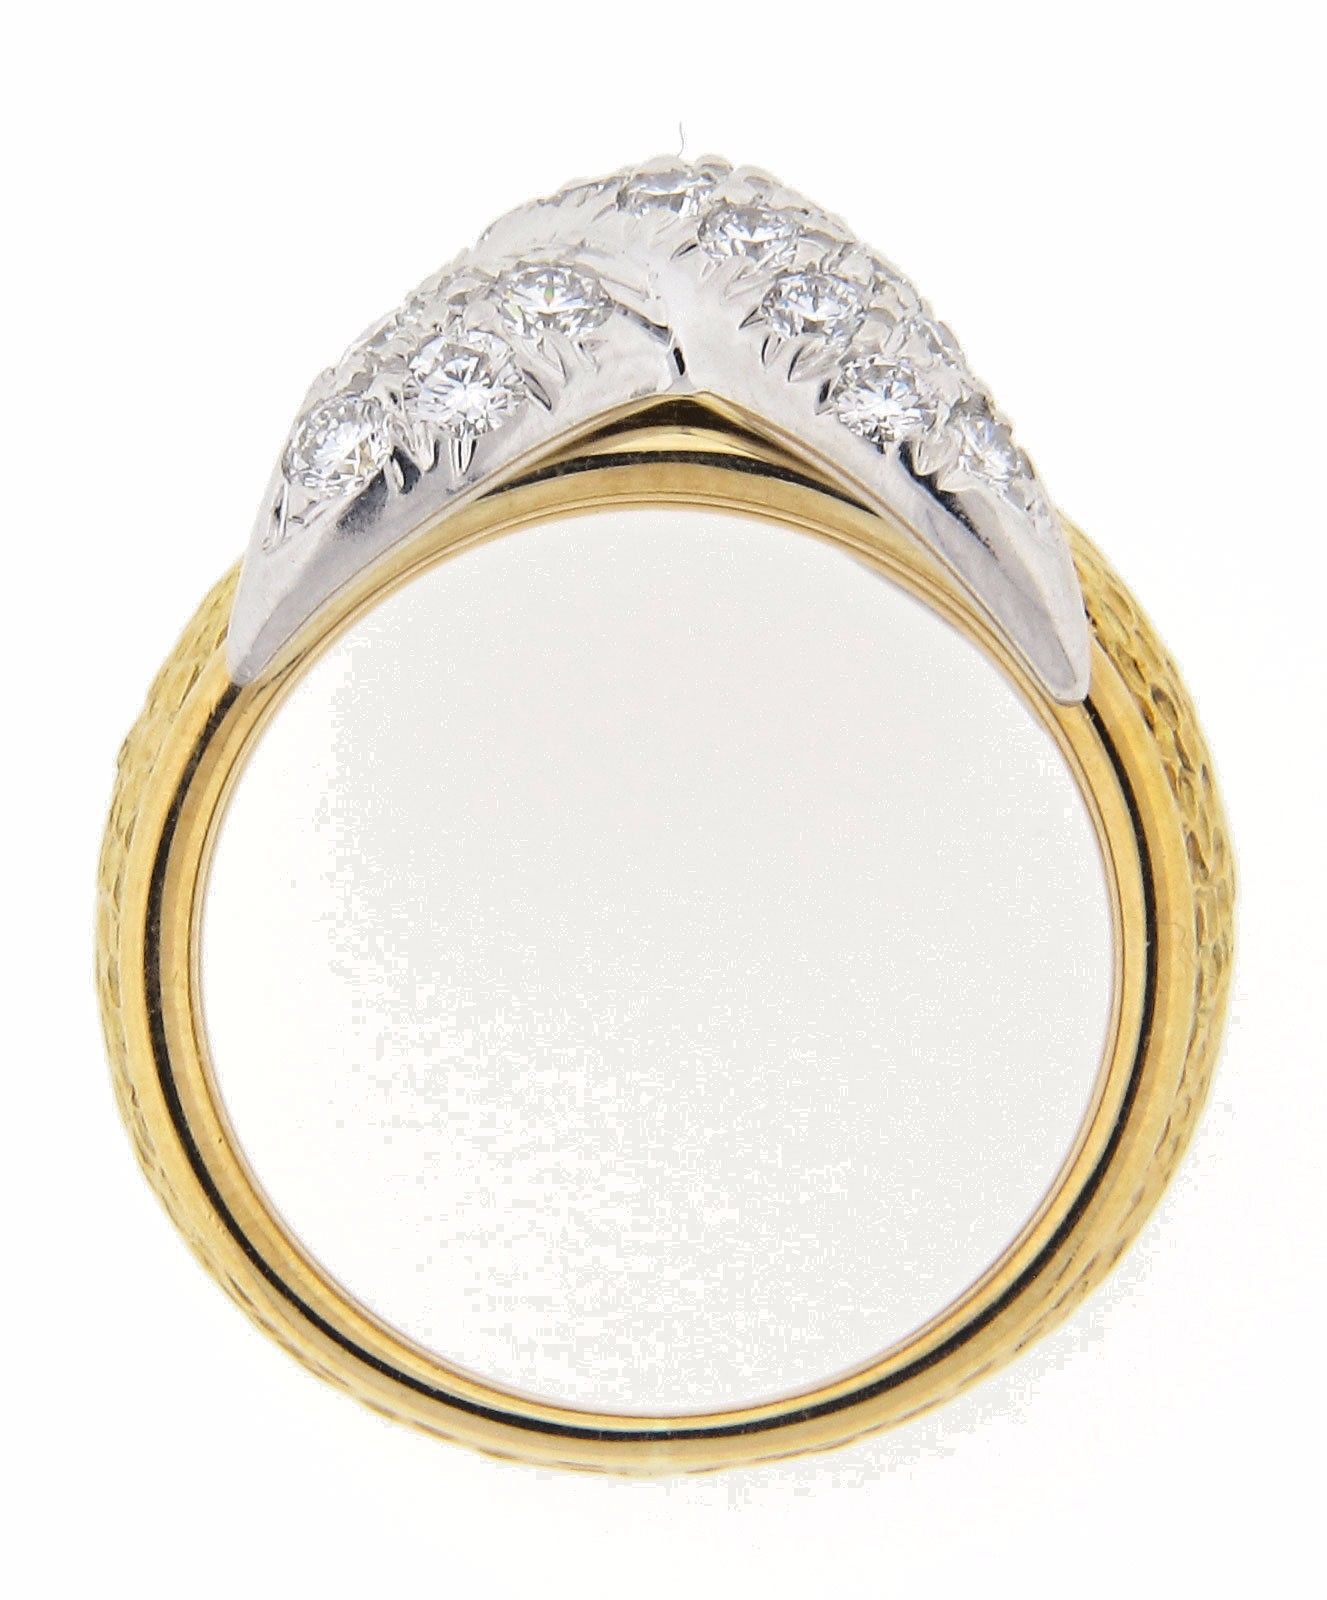 Tiffany & Co. Schlumberger "X" Pave Diamond Ring with Bark Style Shank